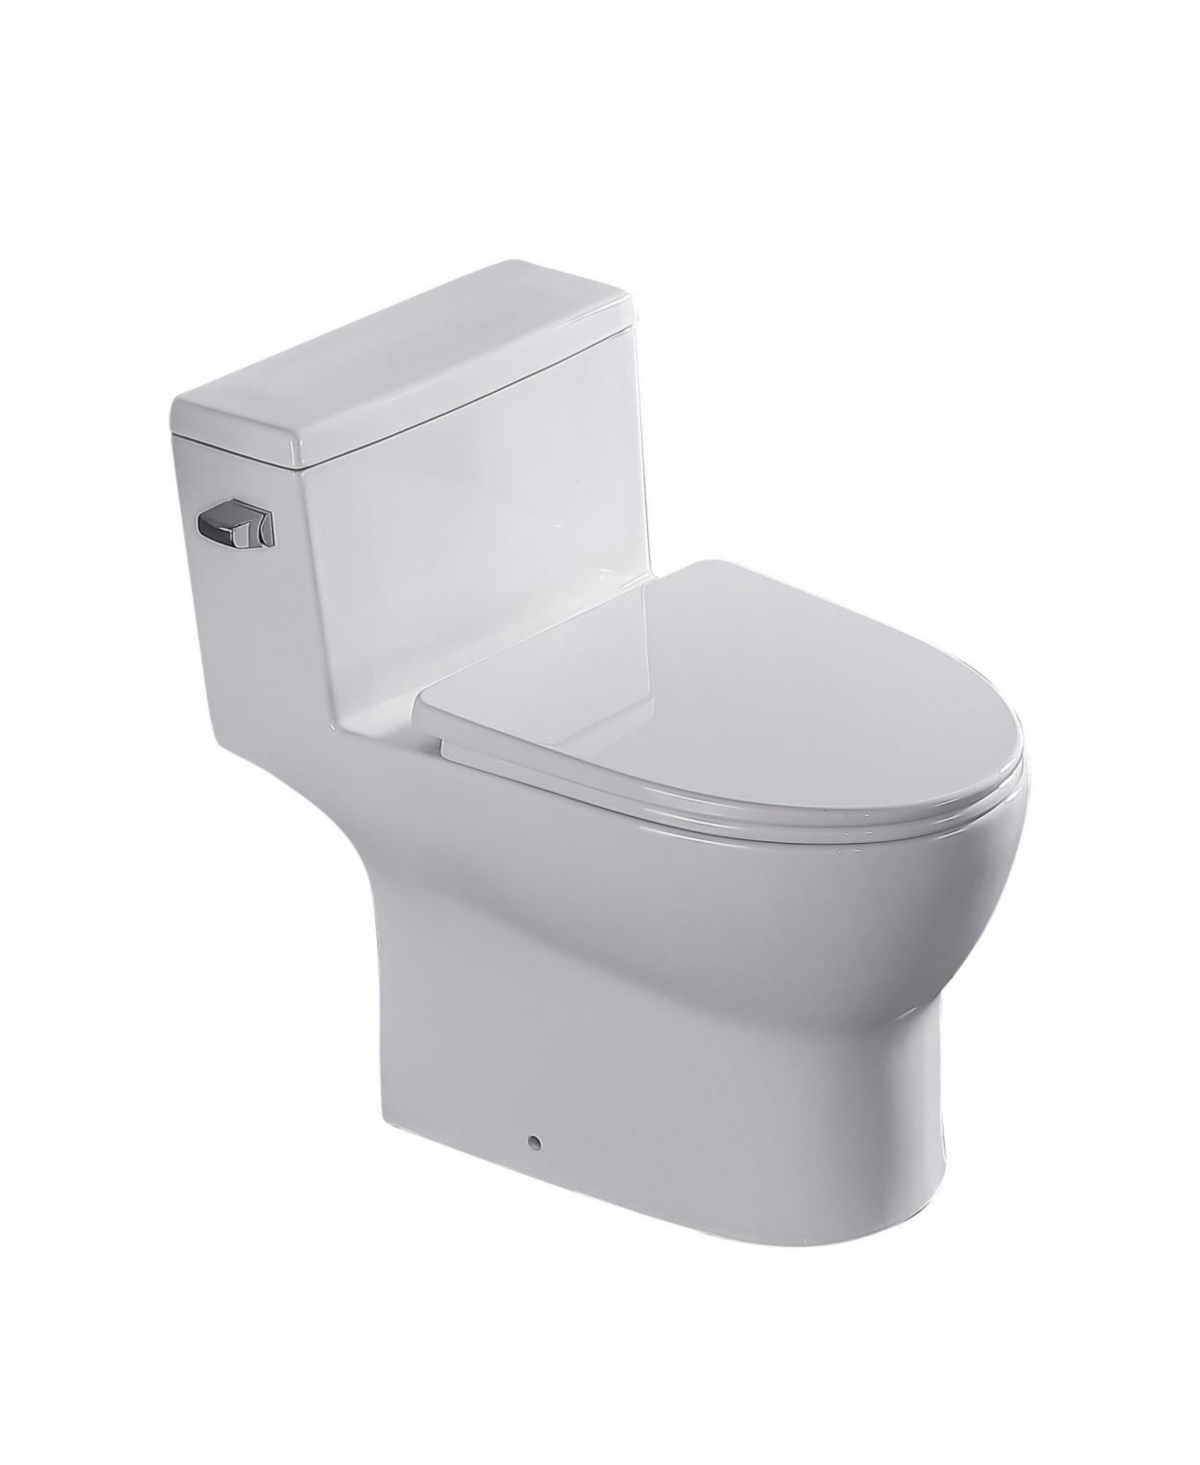 Ceramic One Piece Toilet, Single Flush With Soft Closing Seat 0003 - White